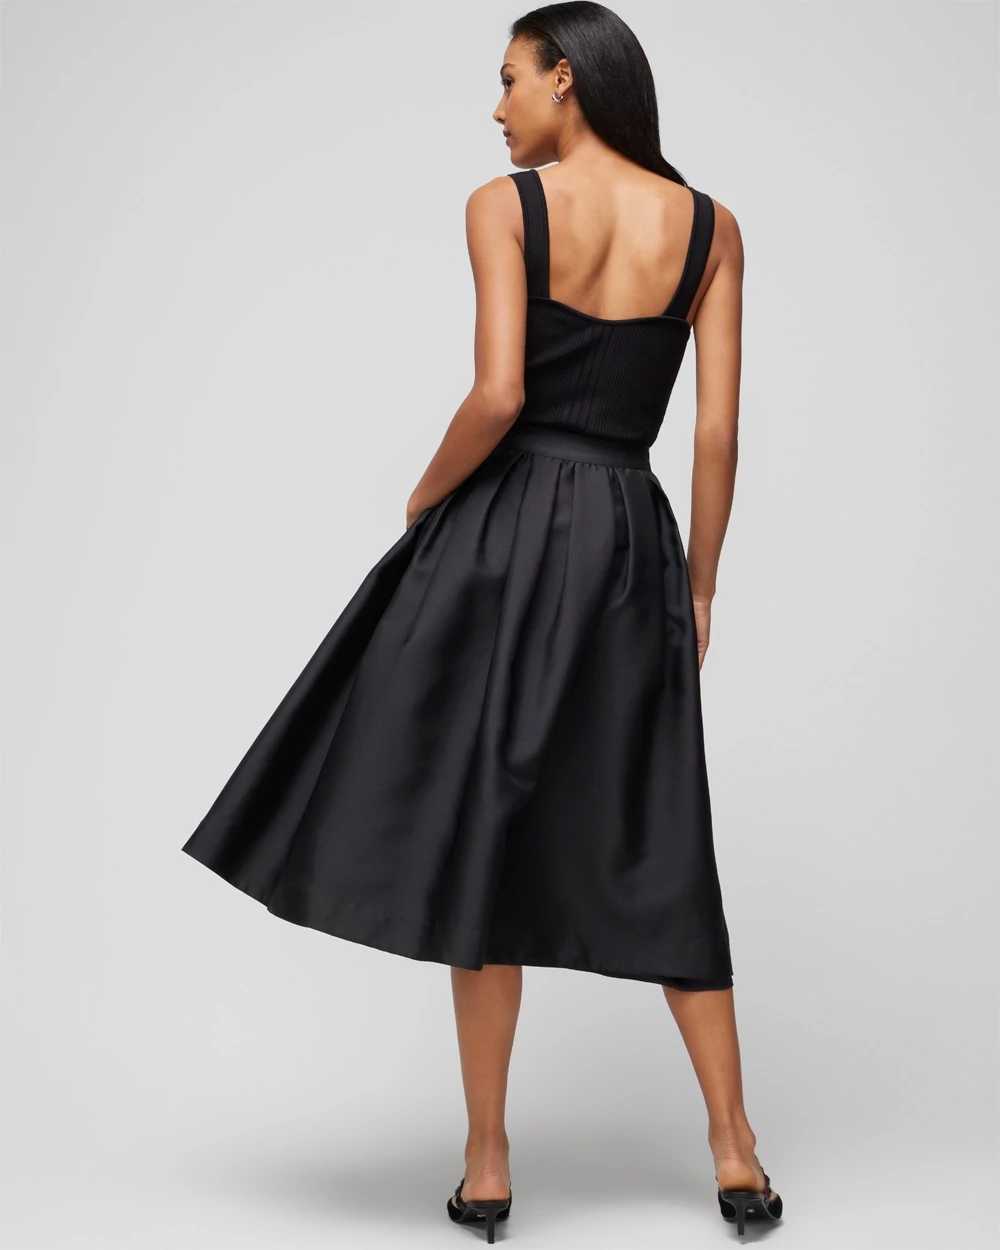 Fit-And-Flare Midi Skirt click to view larger image.